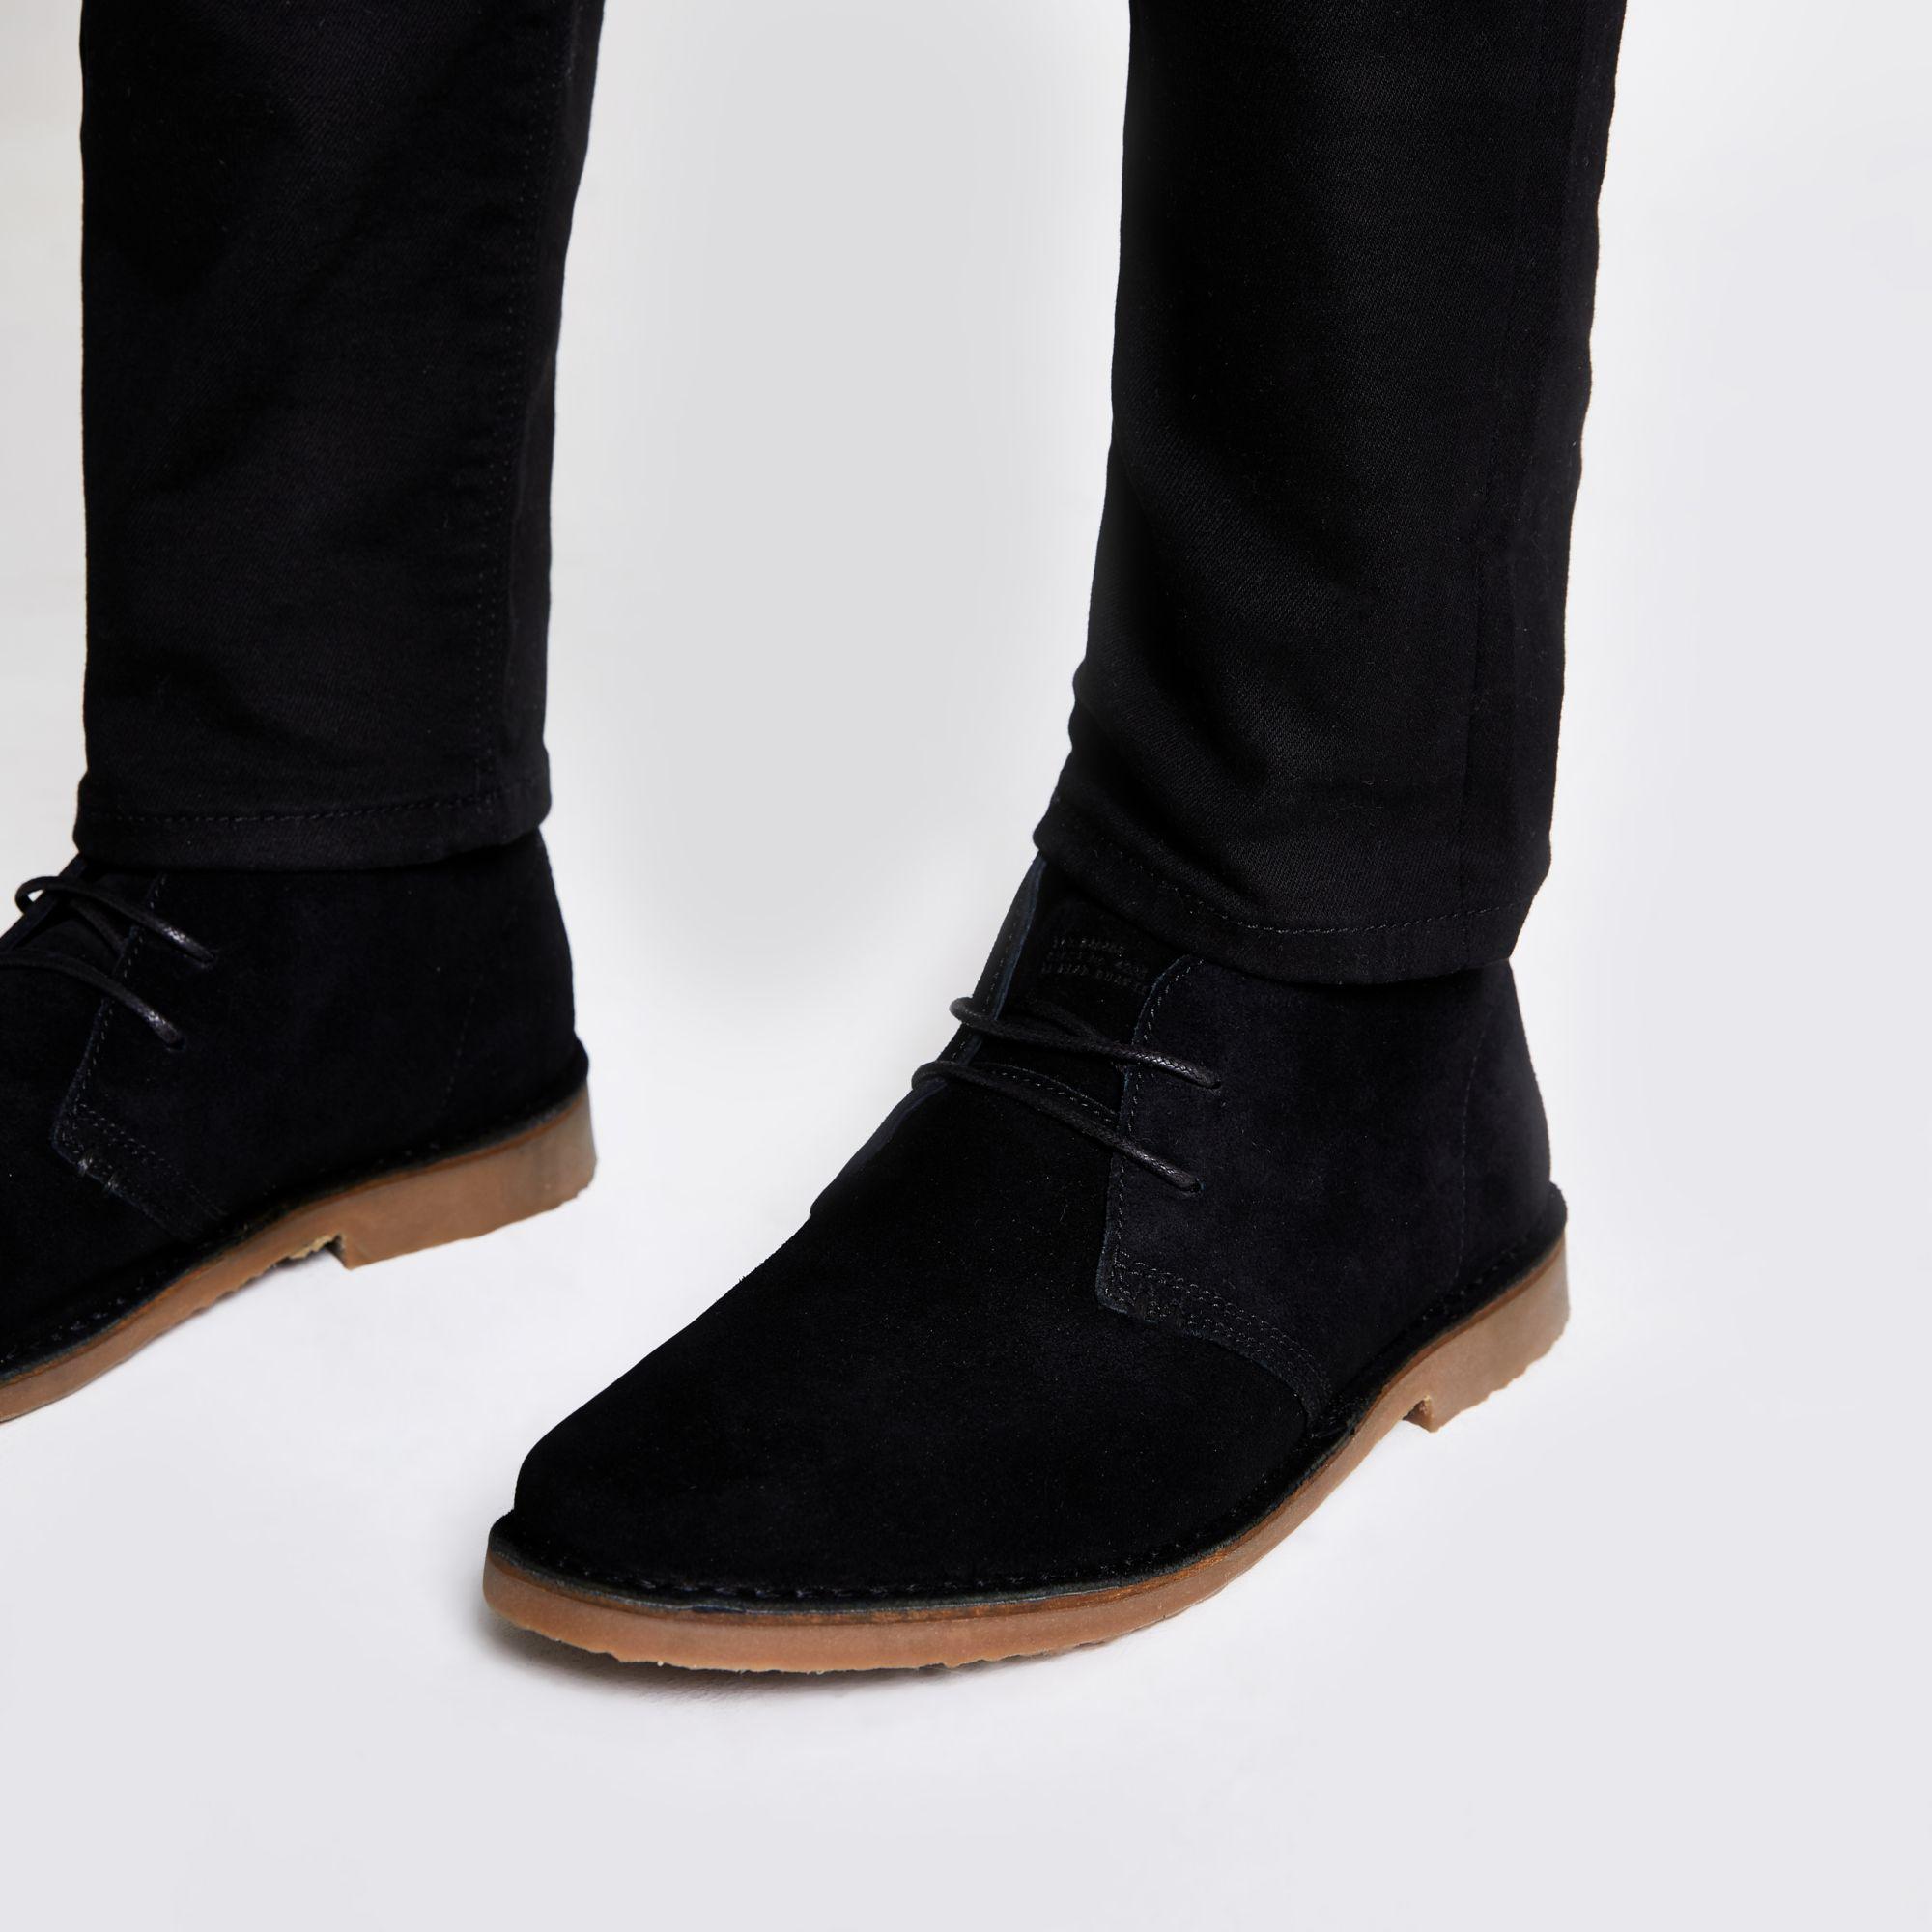 Lyst - River Island Suede Chukka Boots in Black for Men